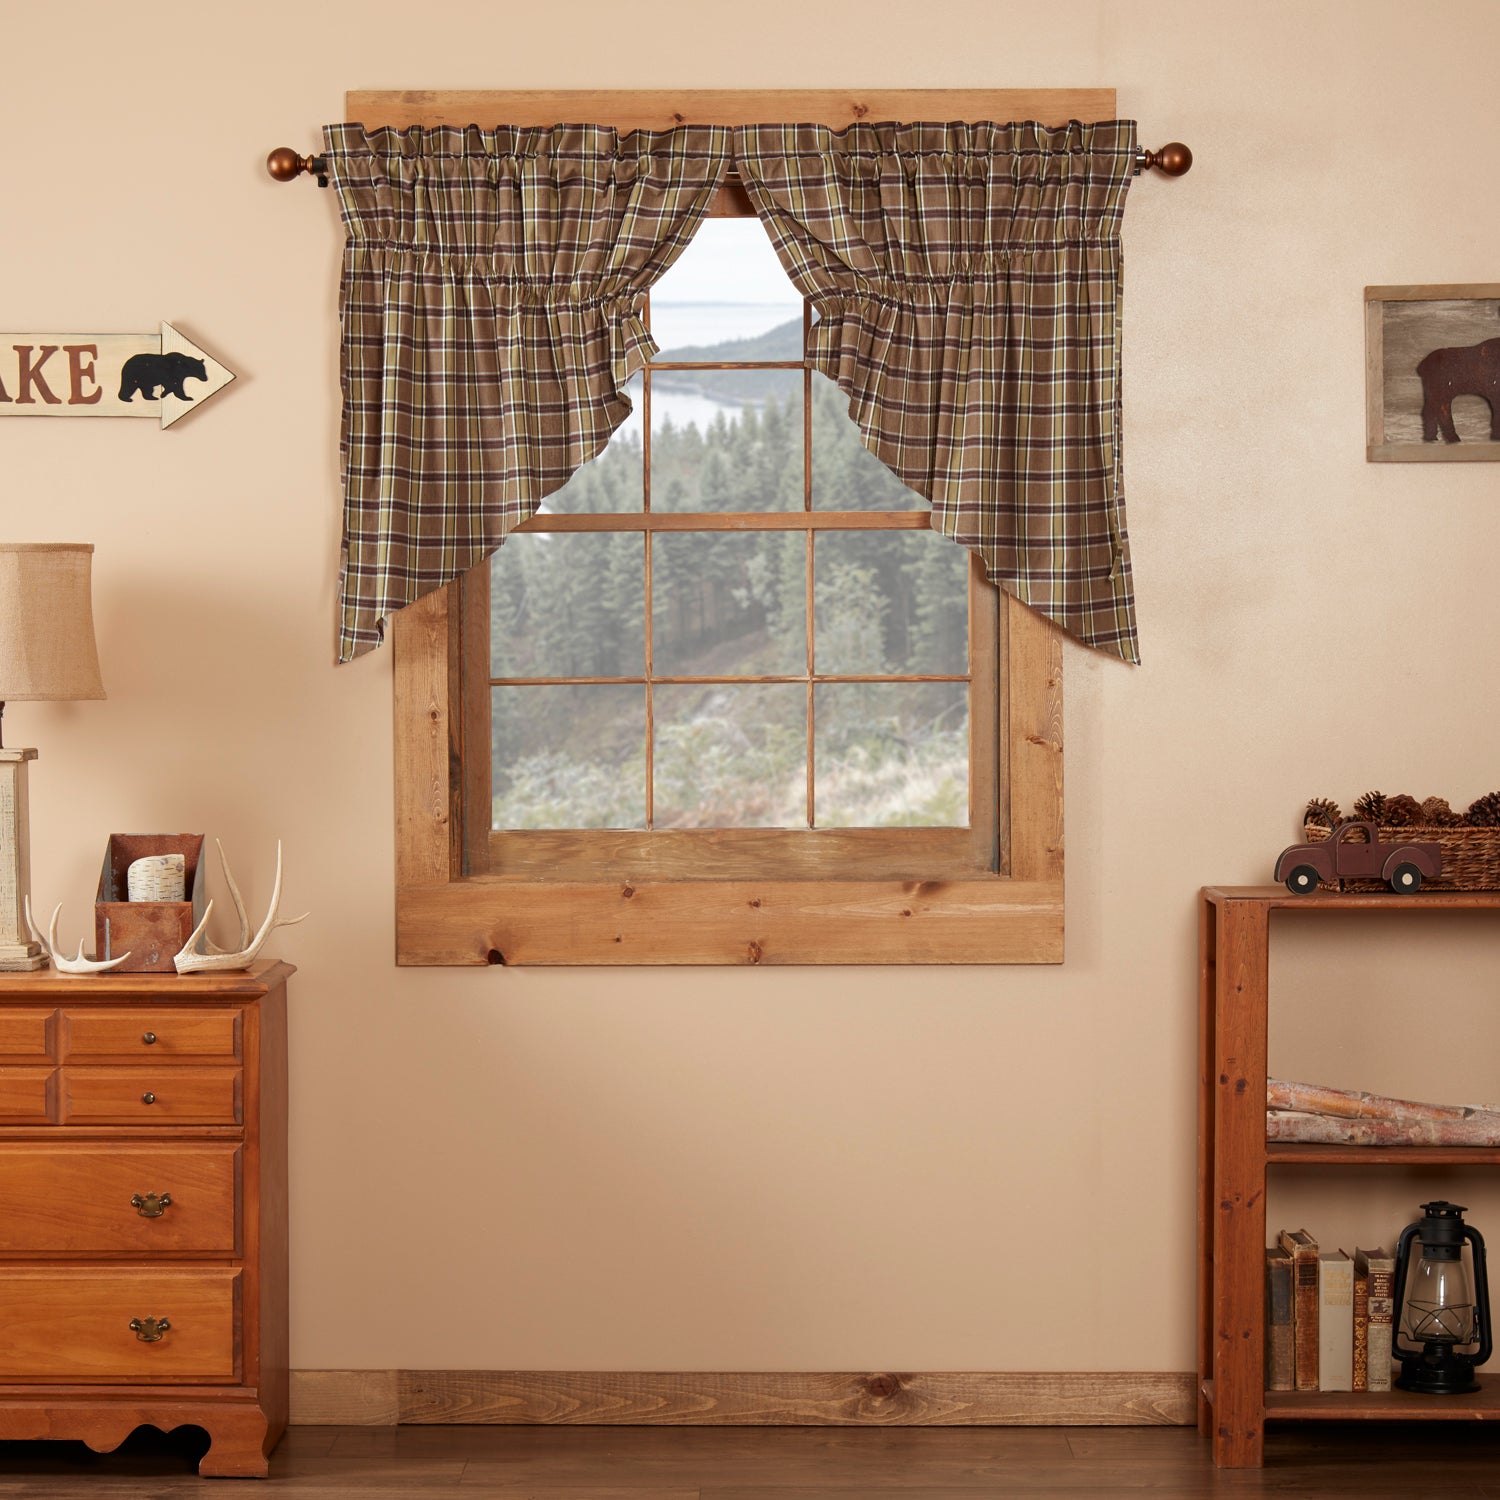 Rustic Swag Set Wyatt Brown Creme Plaid Lodge Country Kitchen Curtains Vhc Brands Home Decor